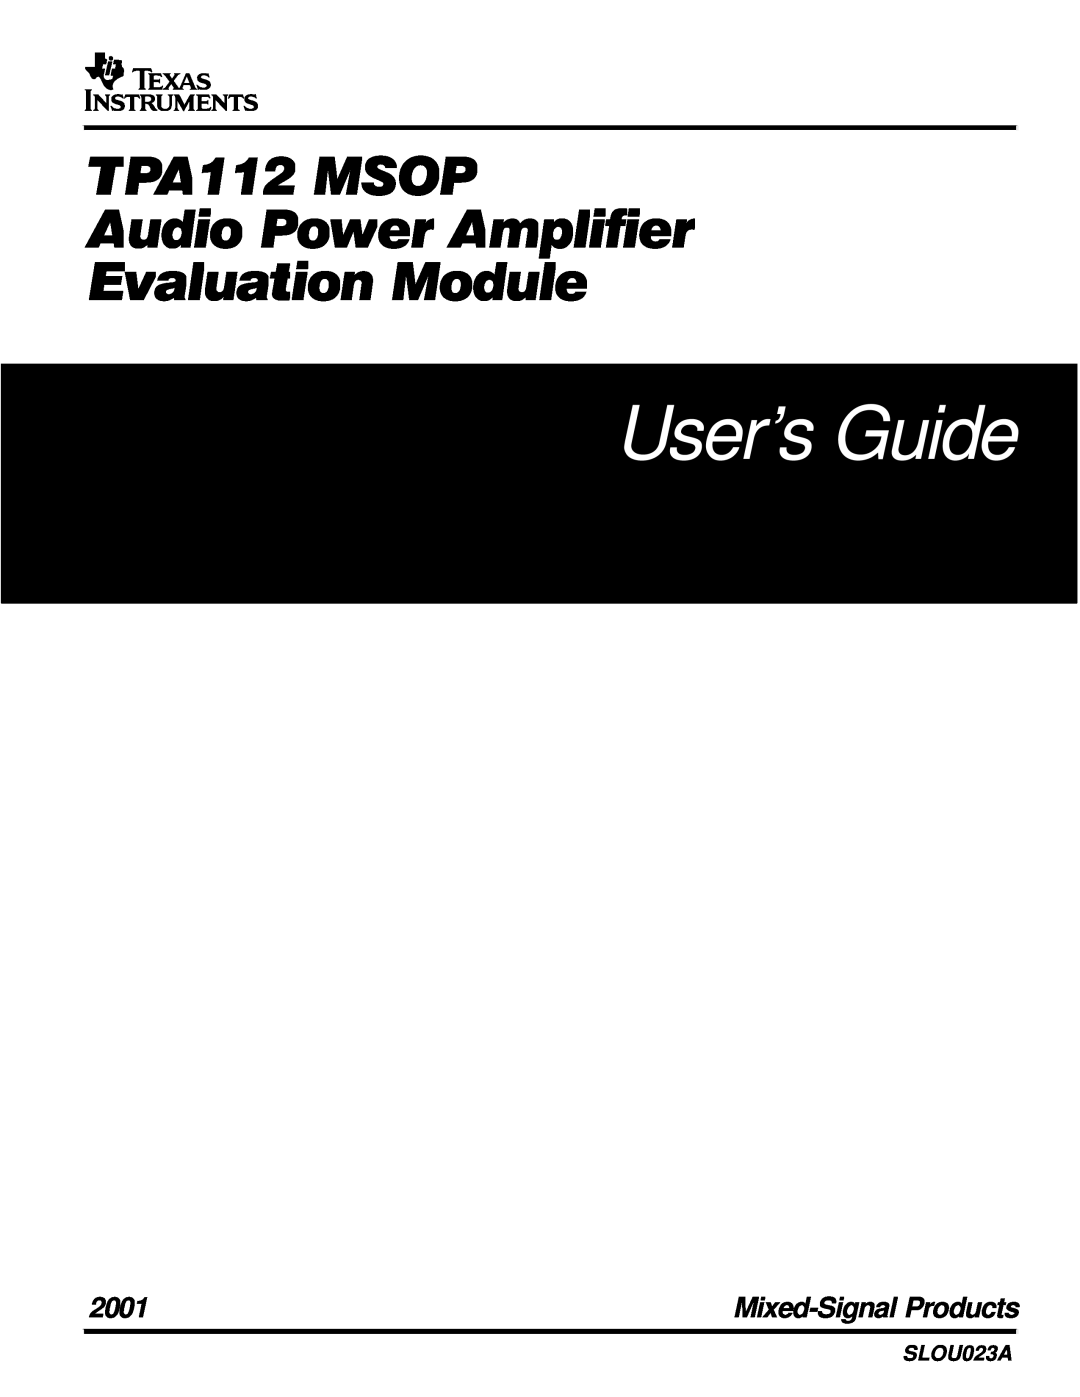 Texas Instruments SLOU023A manual User’s Guide, EvaluATPA1udio12ationPowerMSOPModuleAmplifier, 2001, Mixed-SignalProducts 